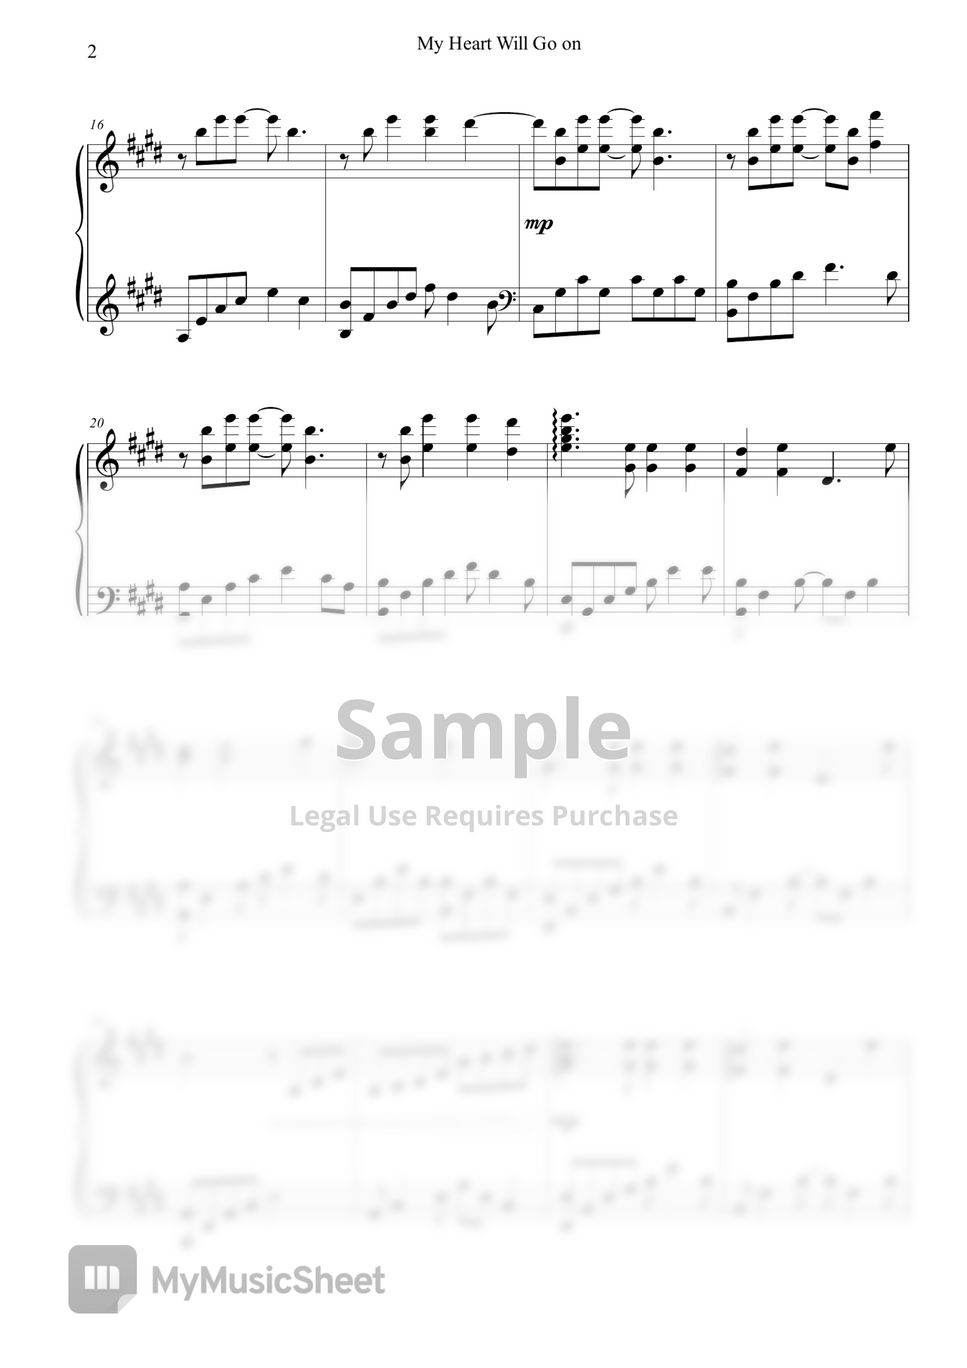 All Music Sheets - (Special Package 30% Discount) by Yuval Salomon